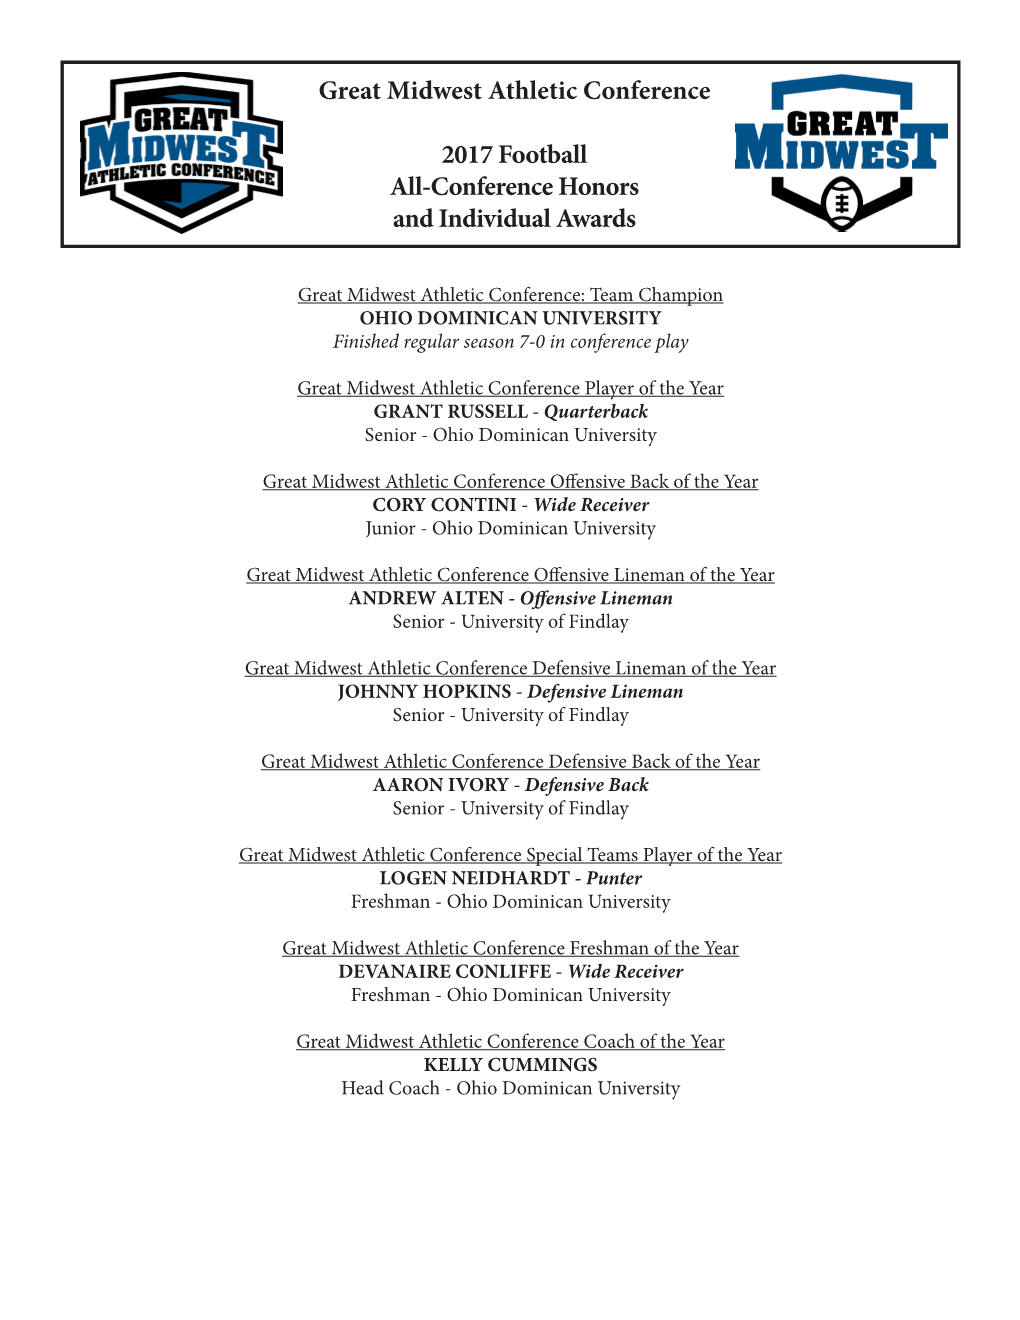 Great Midwest Athletic Conference 2017 Football All-Conference